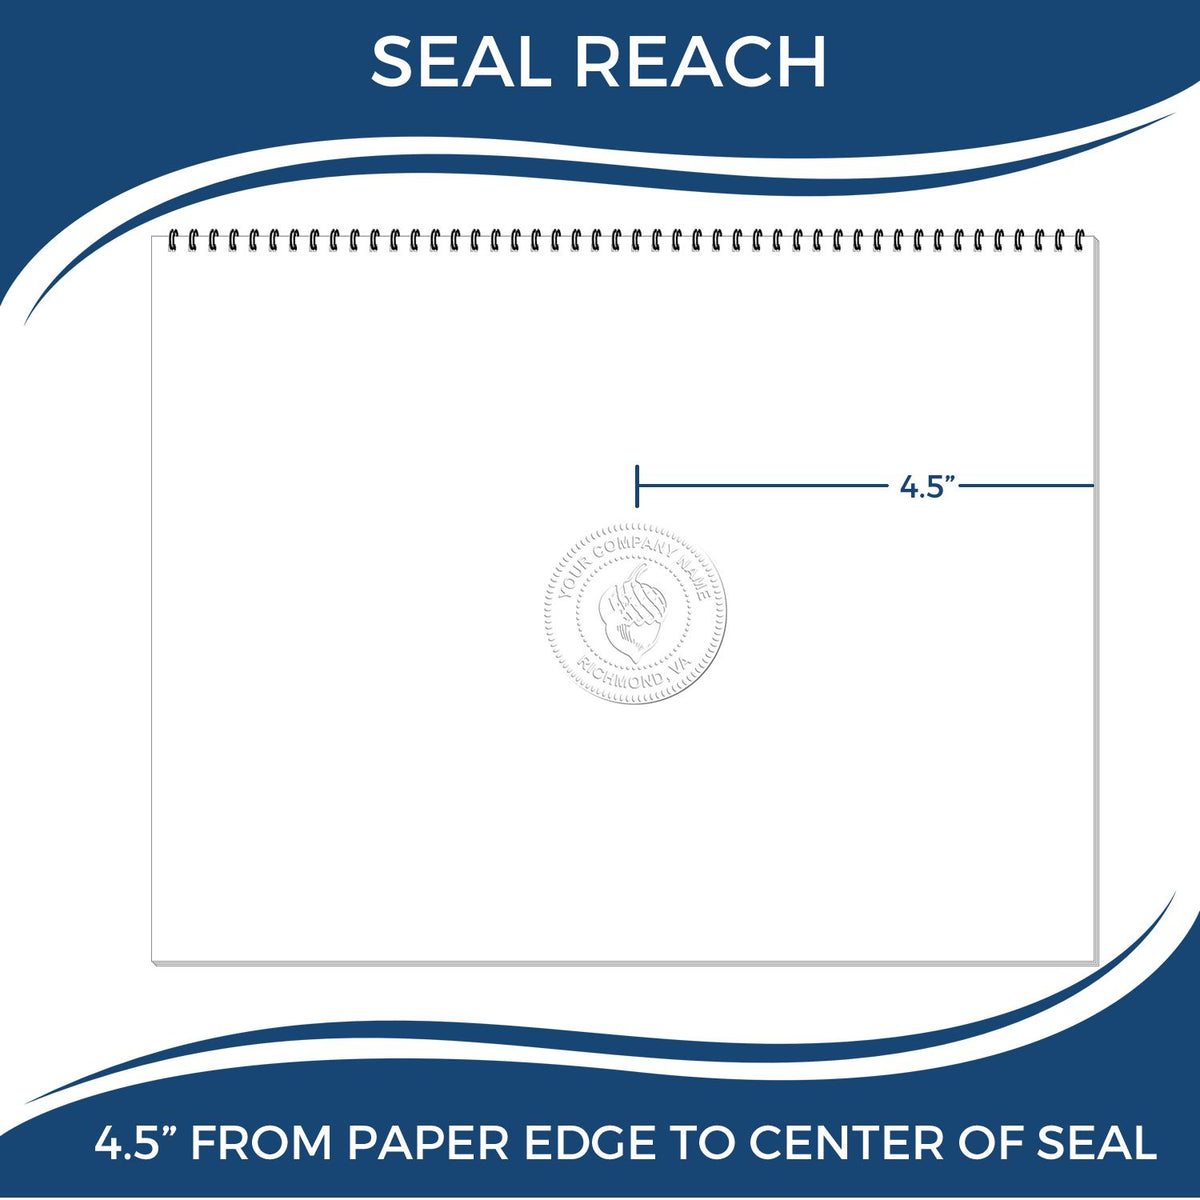 An infographic showing the seal reach which is represented by a ruler and a miniature seal image of the State of North Dakota Extended Long Reach Engineer Seal